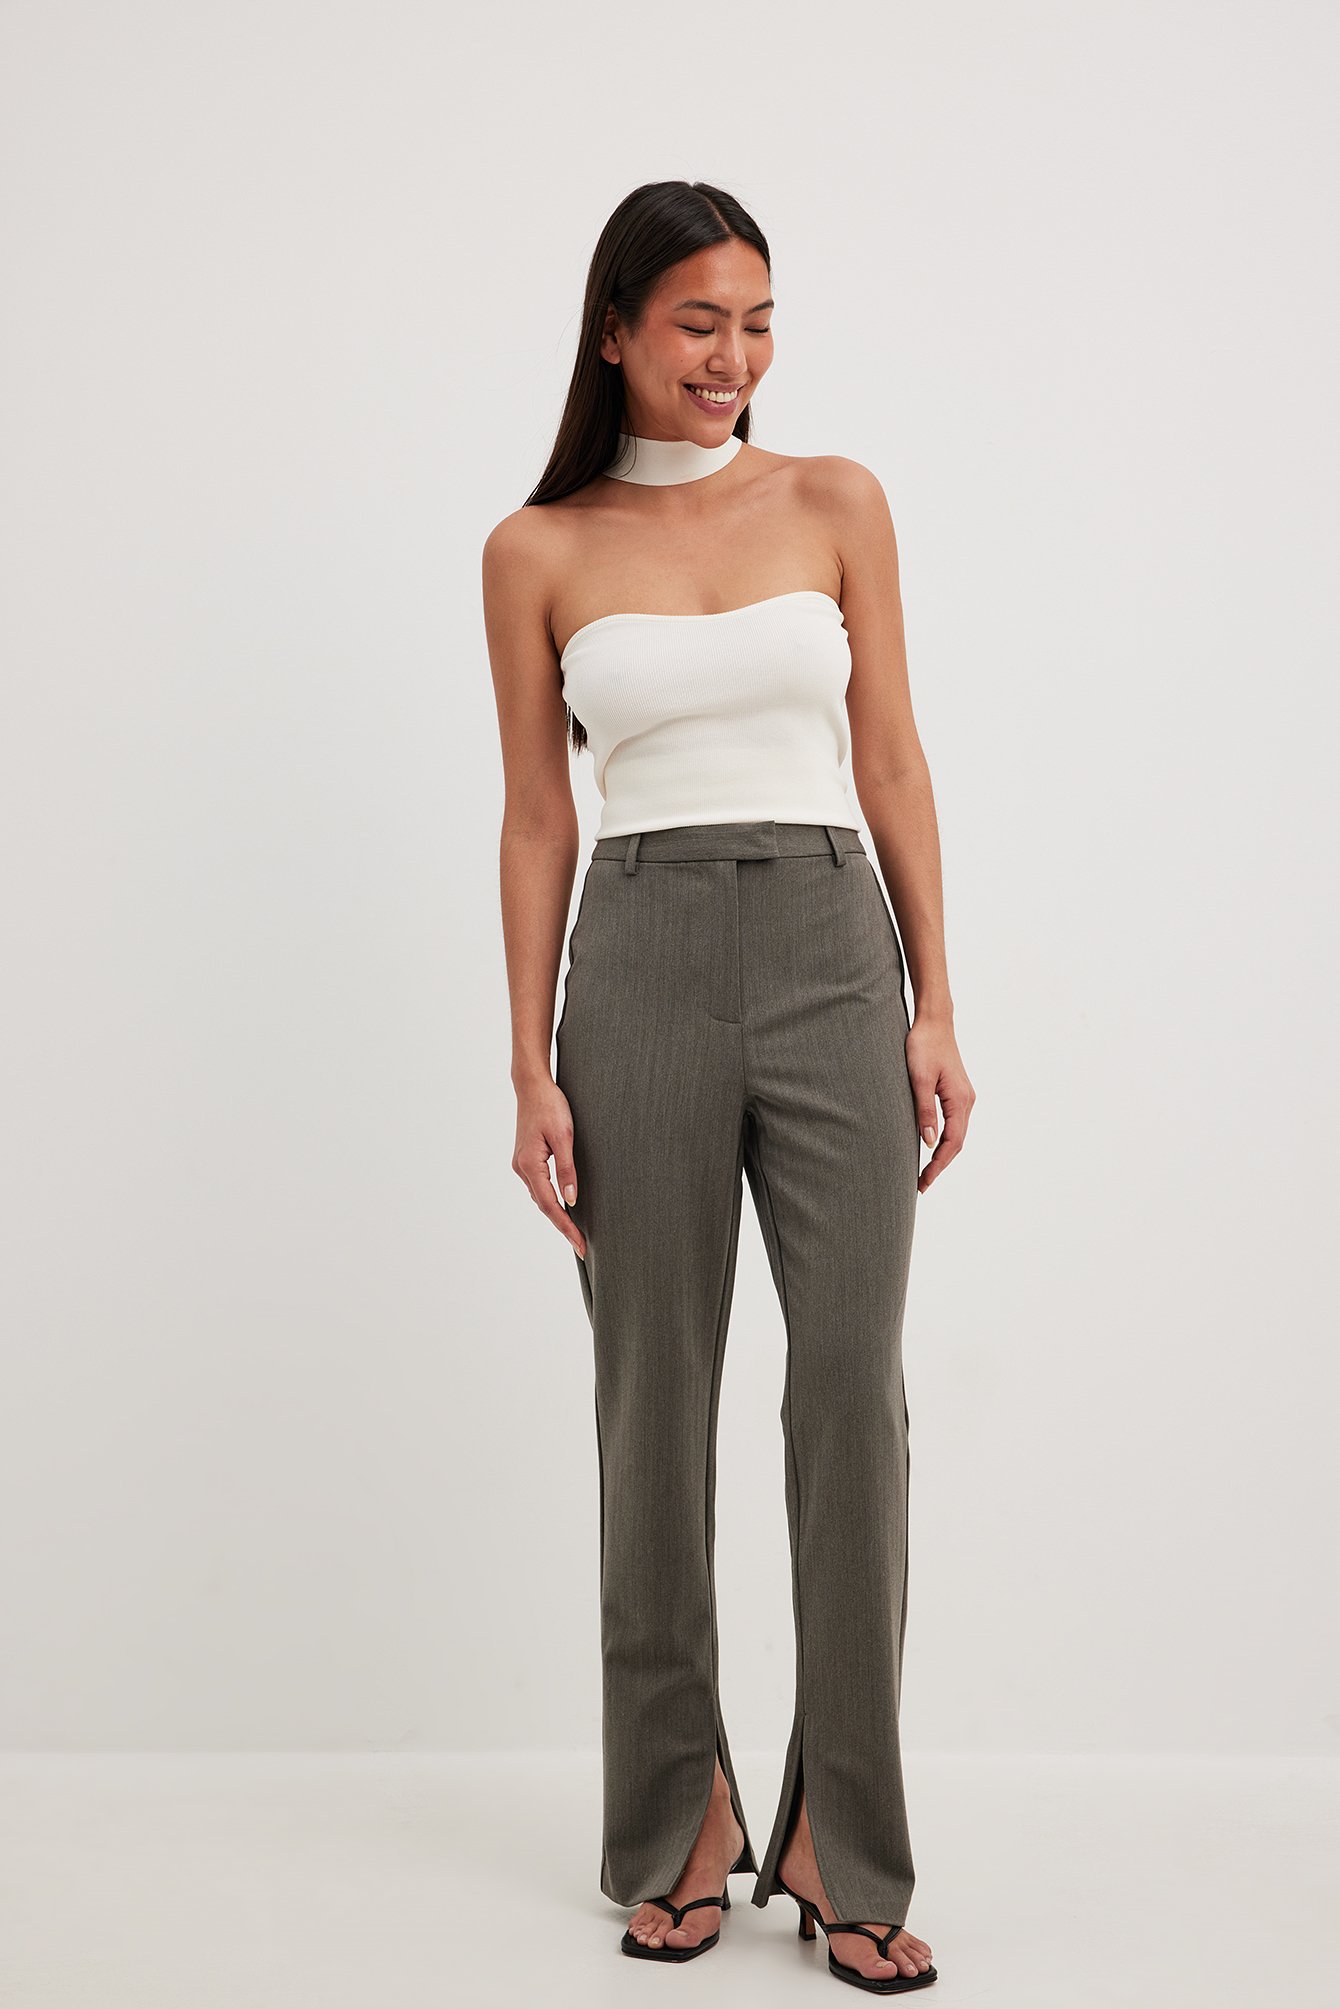 Trousers  Shop Womens Designer Pants and Trousers  The UNDONE  Tagged  grey